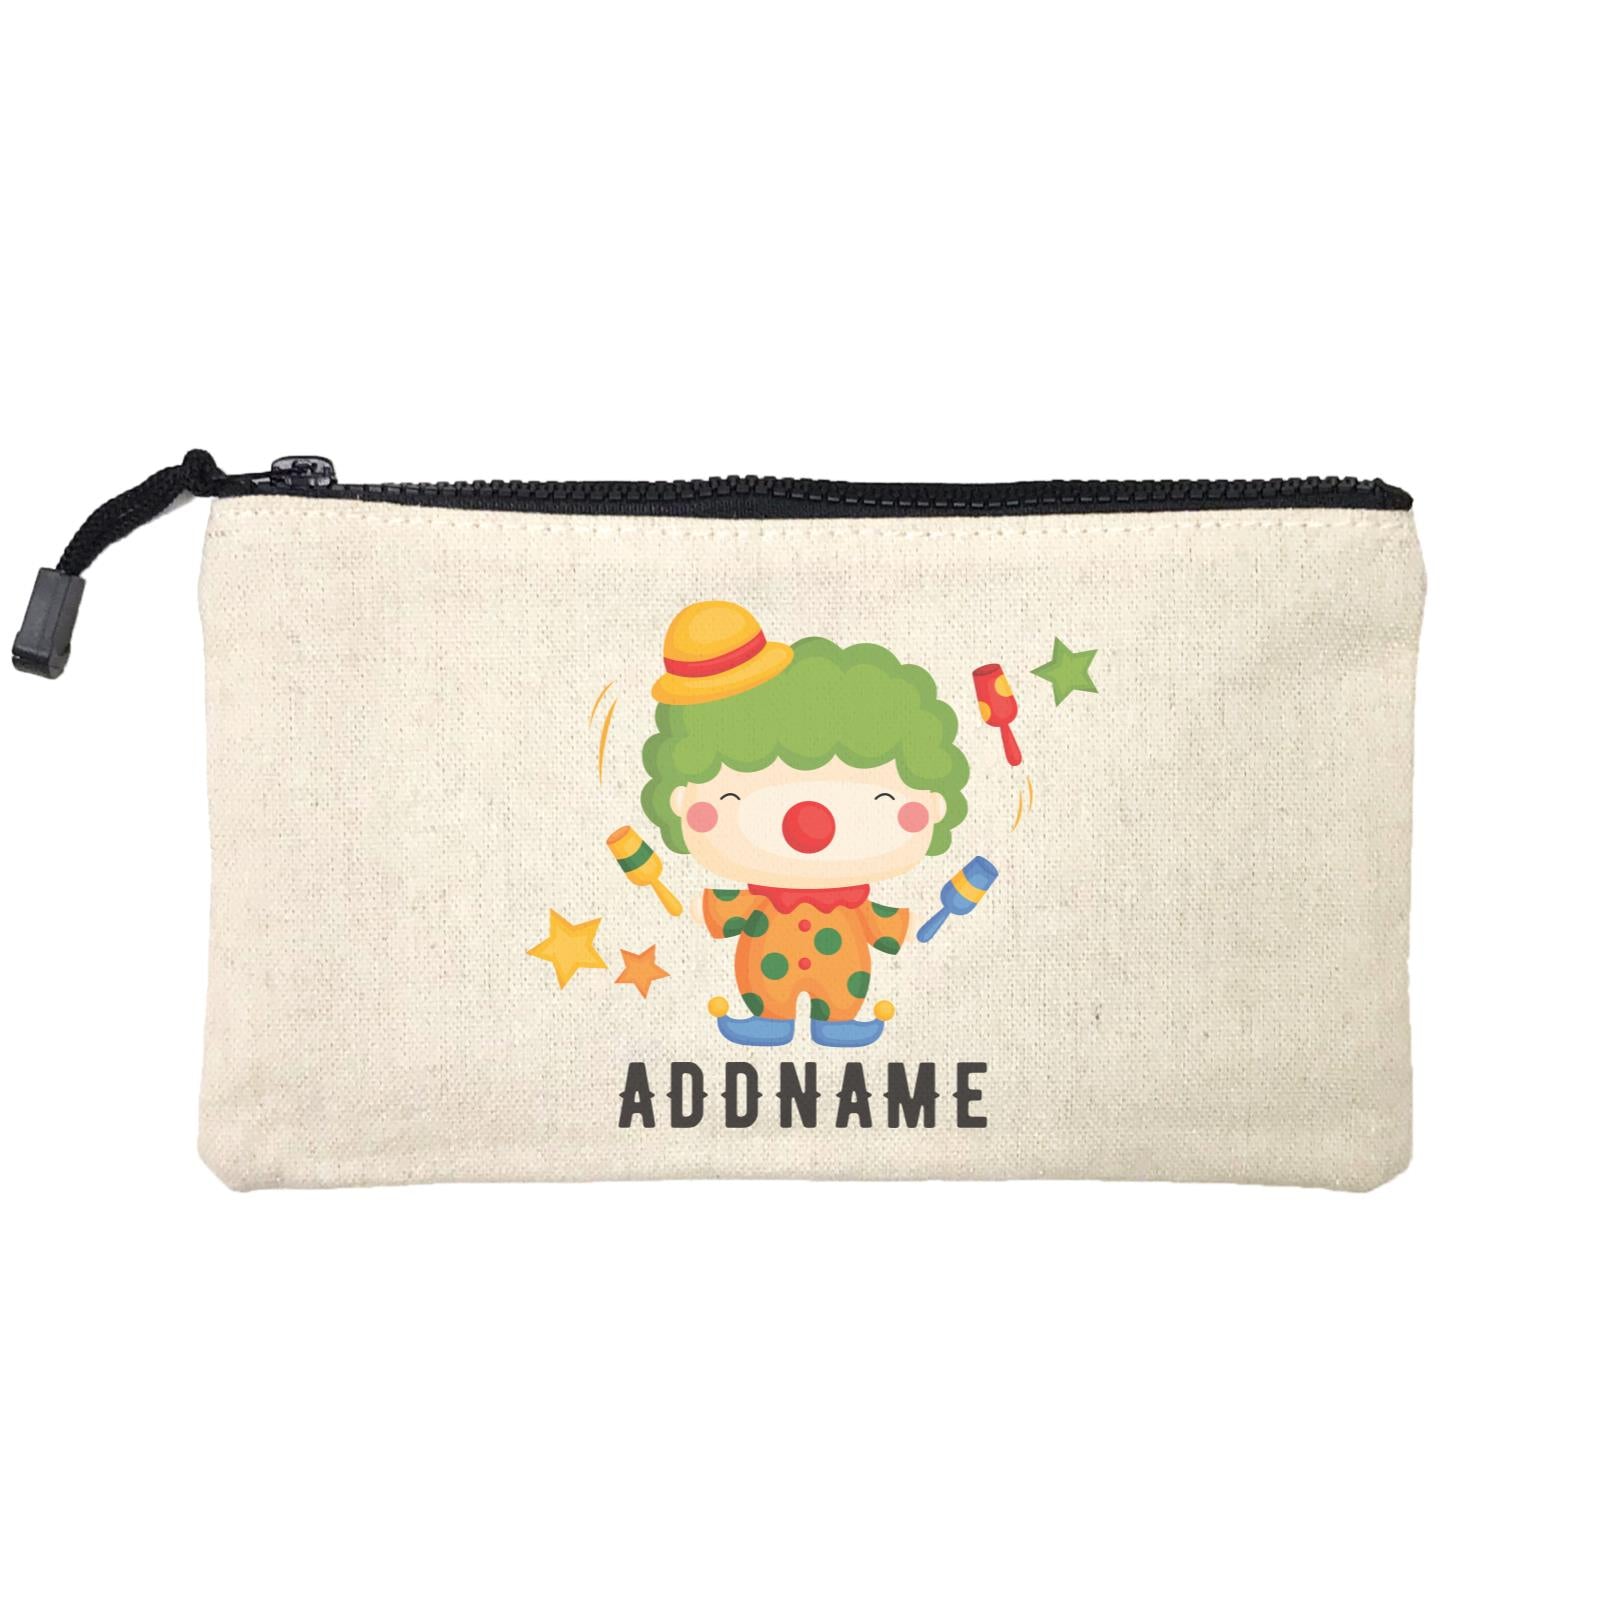 Birthday Circus Happy Clown Juggling Addname Mini Accessories Stationery Pouch